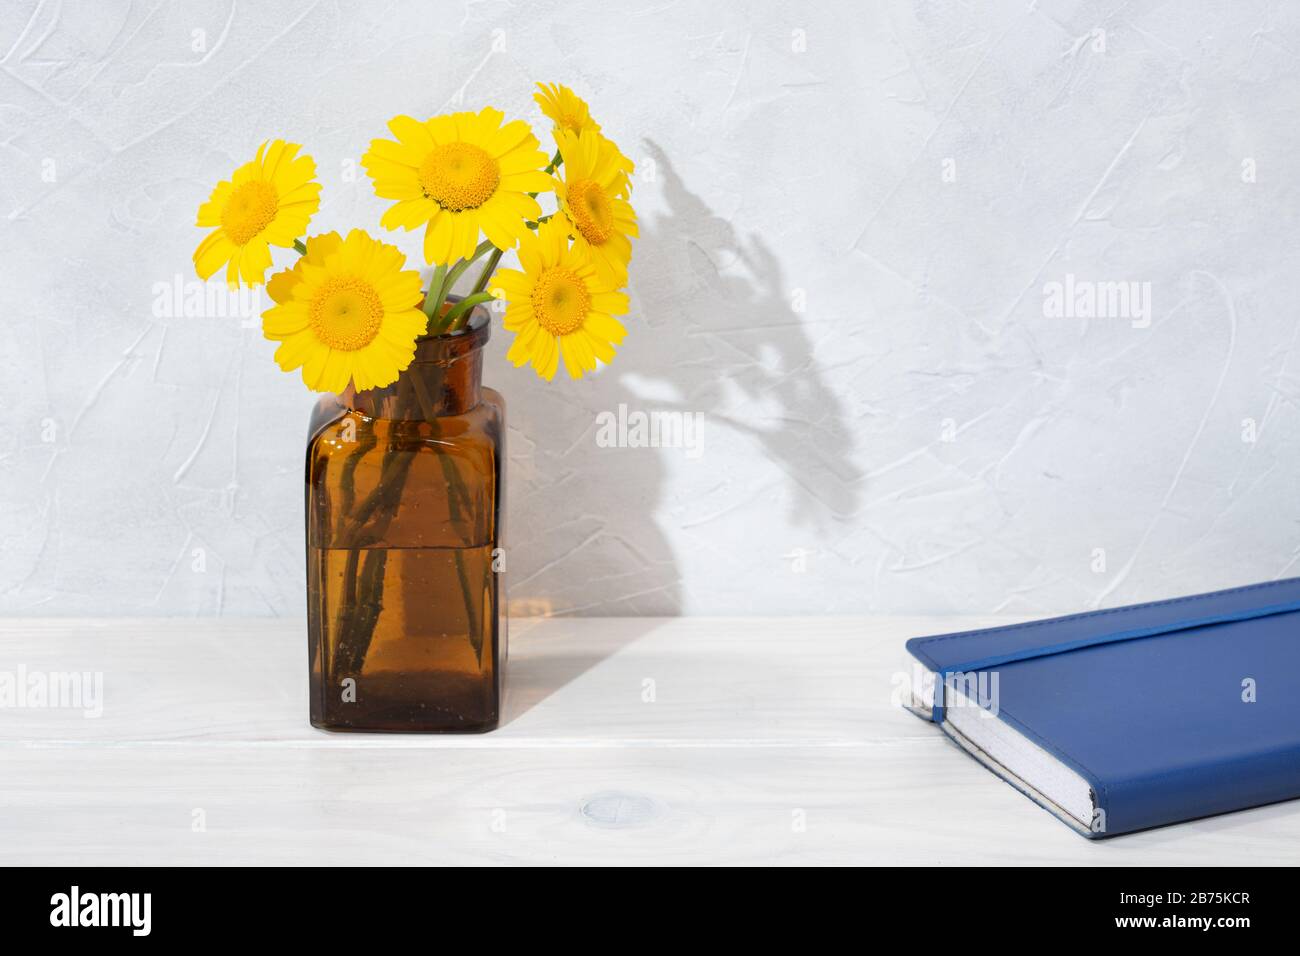 Beautiful flowers in bottle and blue diary on wooden table. Writing or drawing concept. Leisure time. Copy space Stock Photo